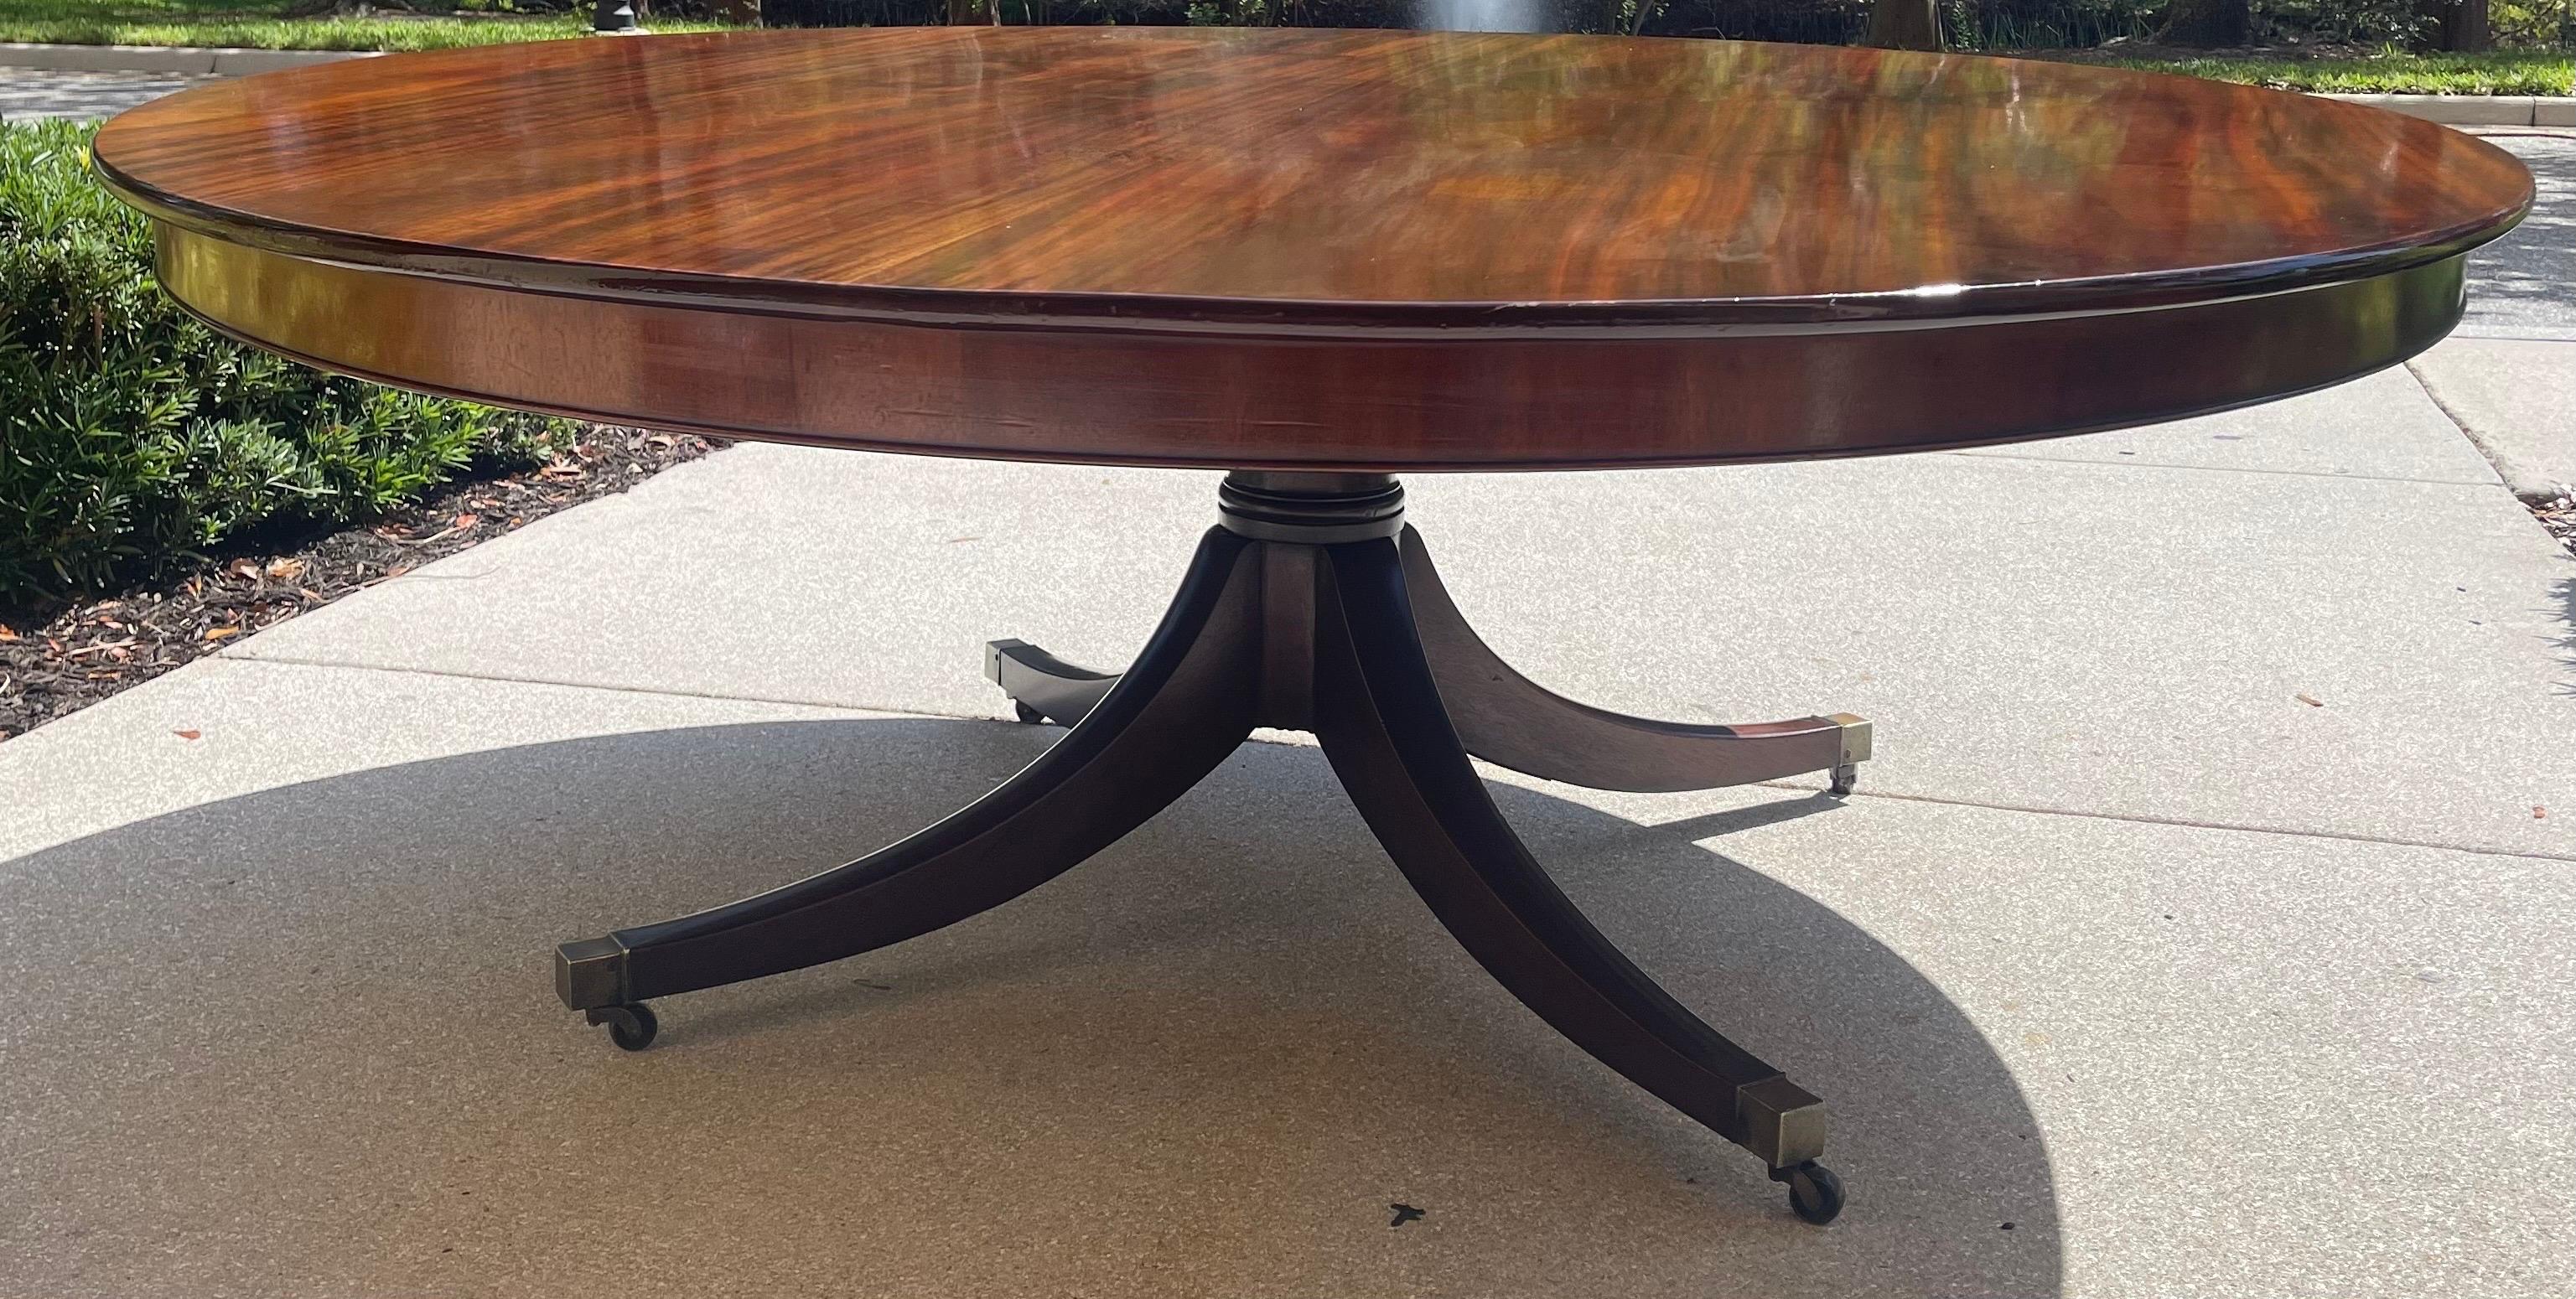 A fine 76” diameter Regency style solid mahogany dining table/ center table,
custom made in the US using the finest Materials in the early 1990s. 
The pedestal consists of four sabre legs ending in solid brass square castors on wheels. 
This